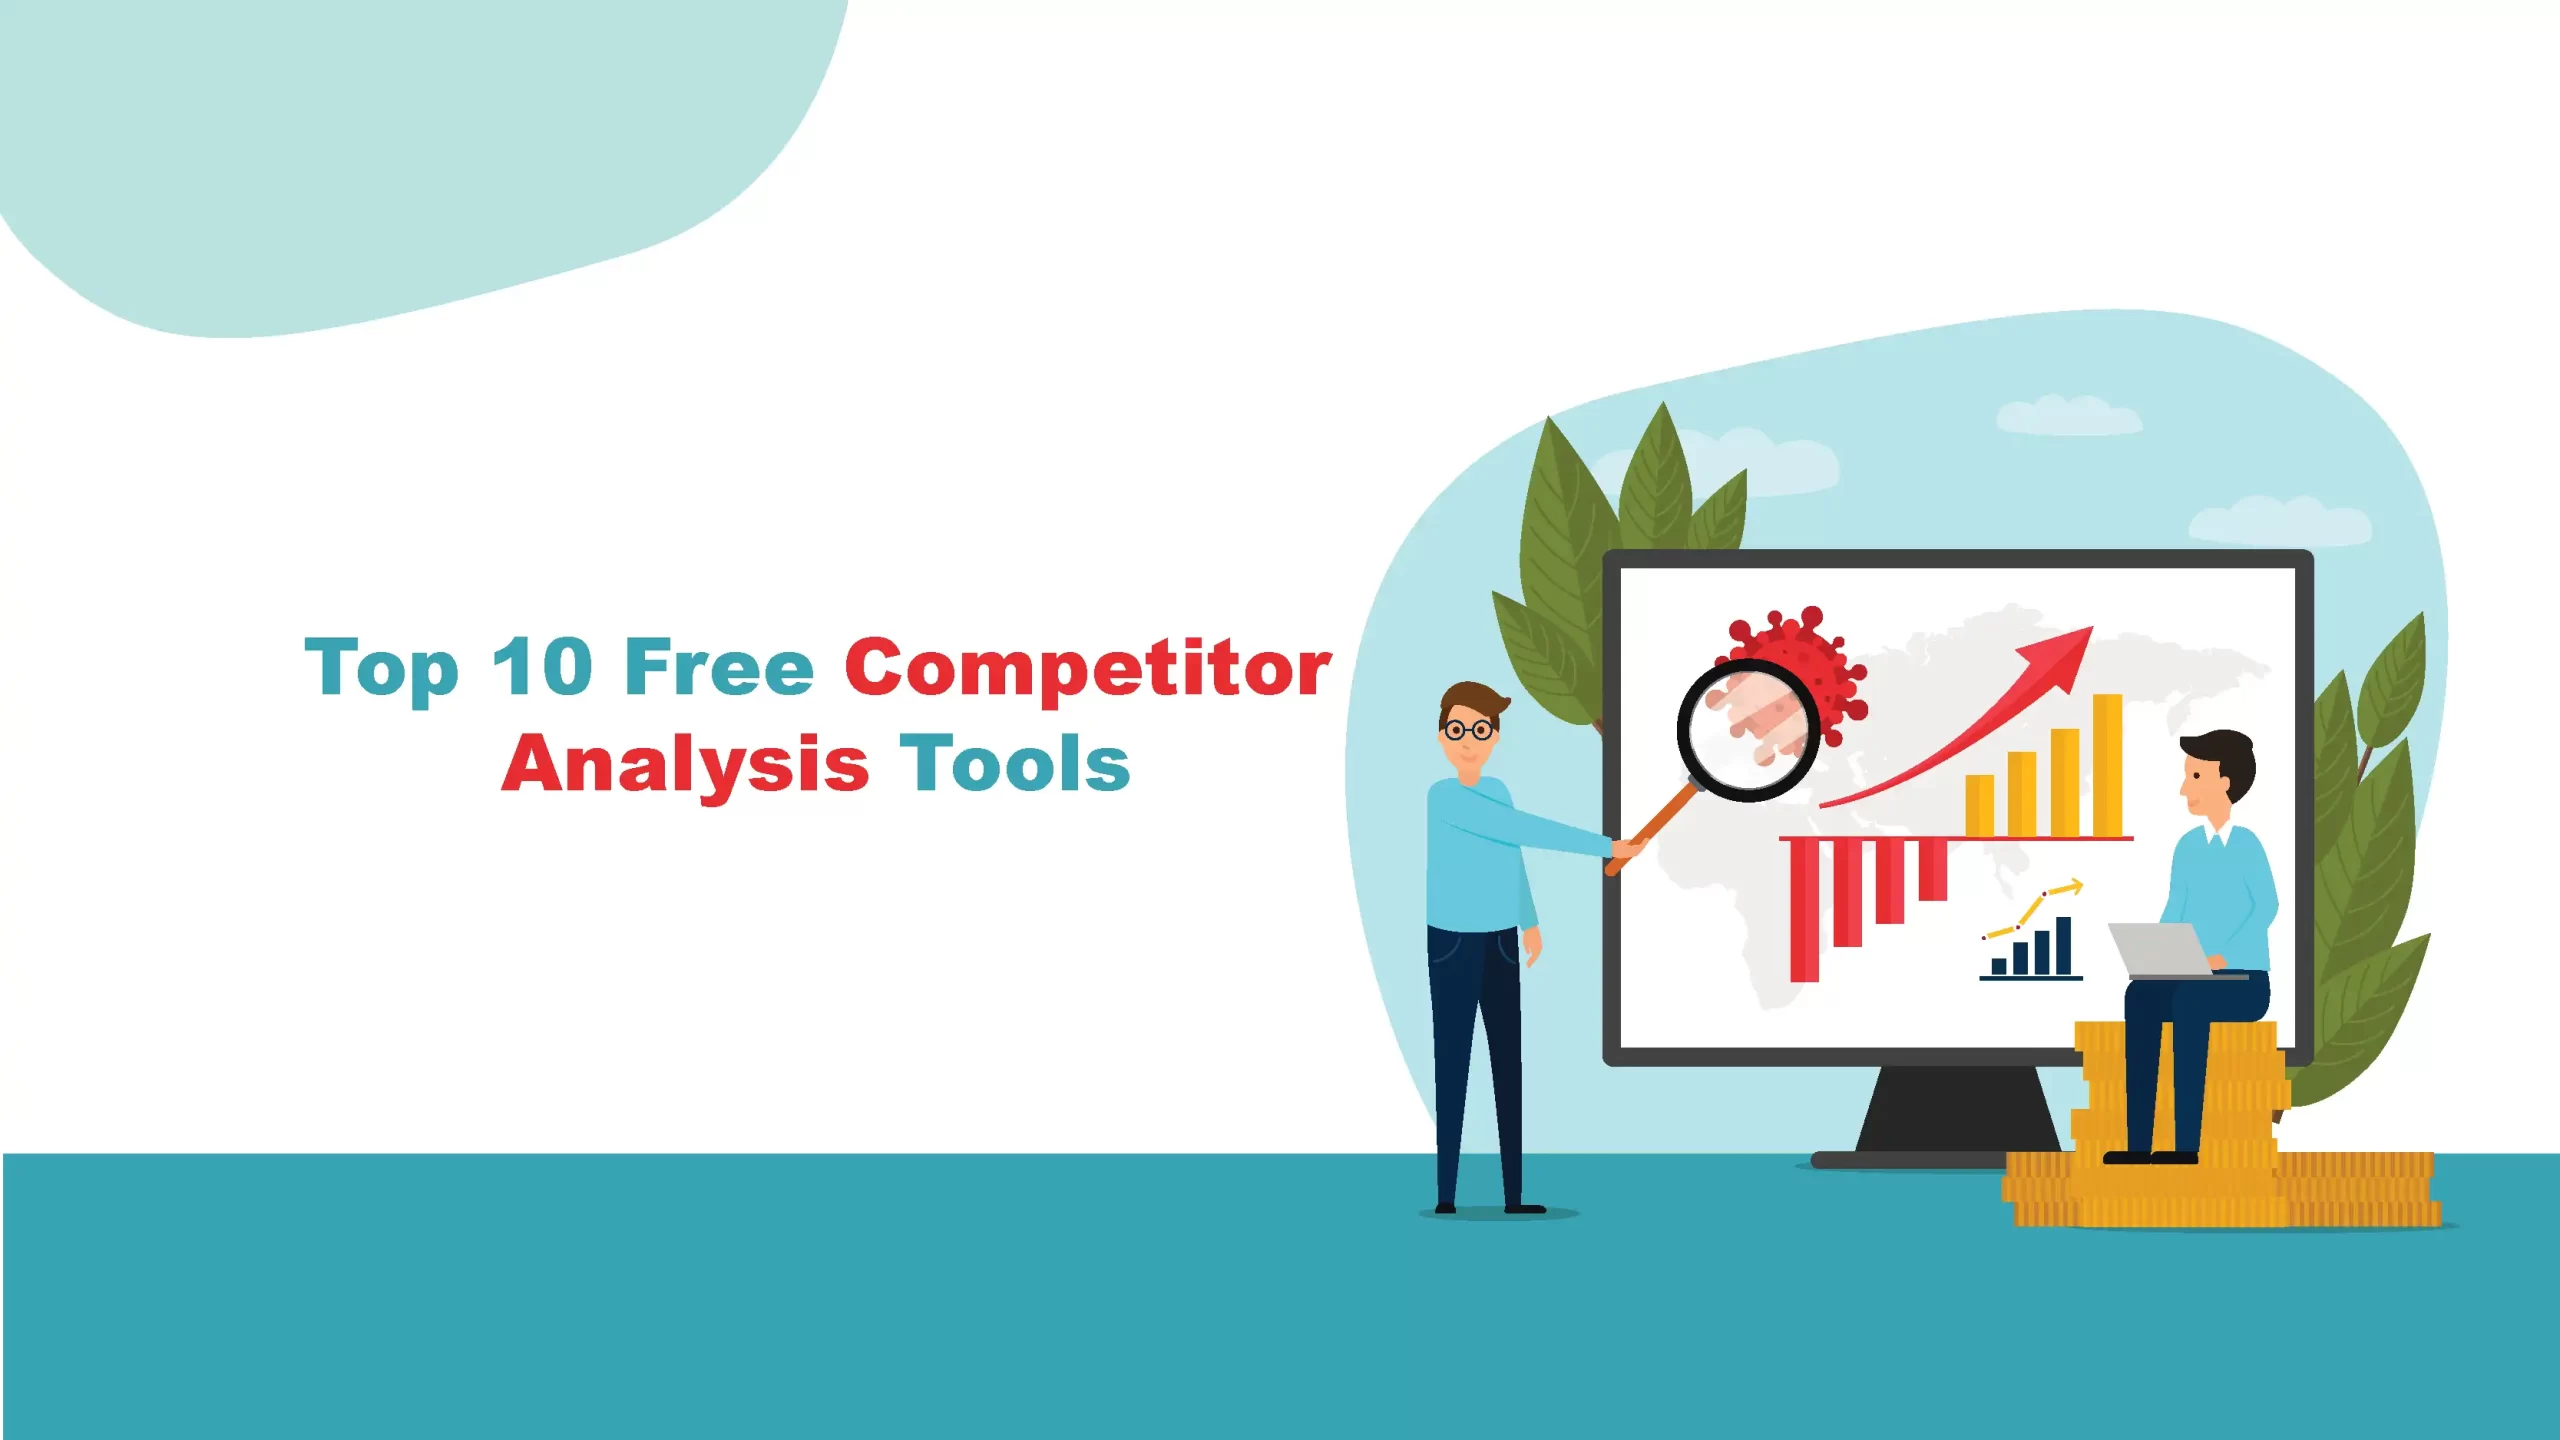 Top 10 Free Competitor Analysis Tools